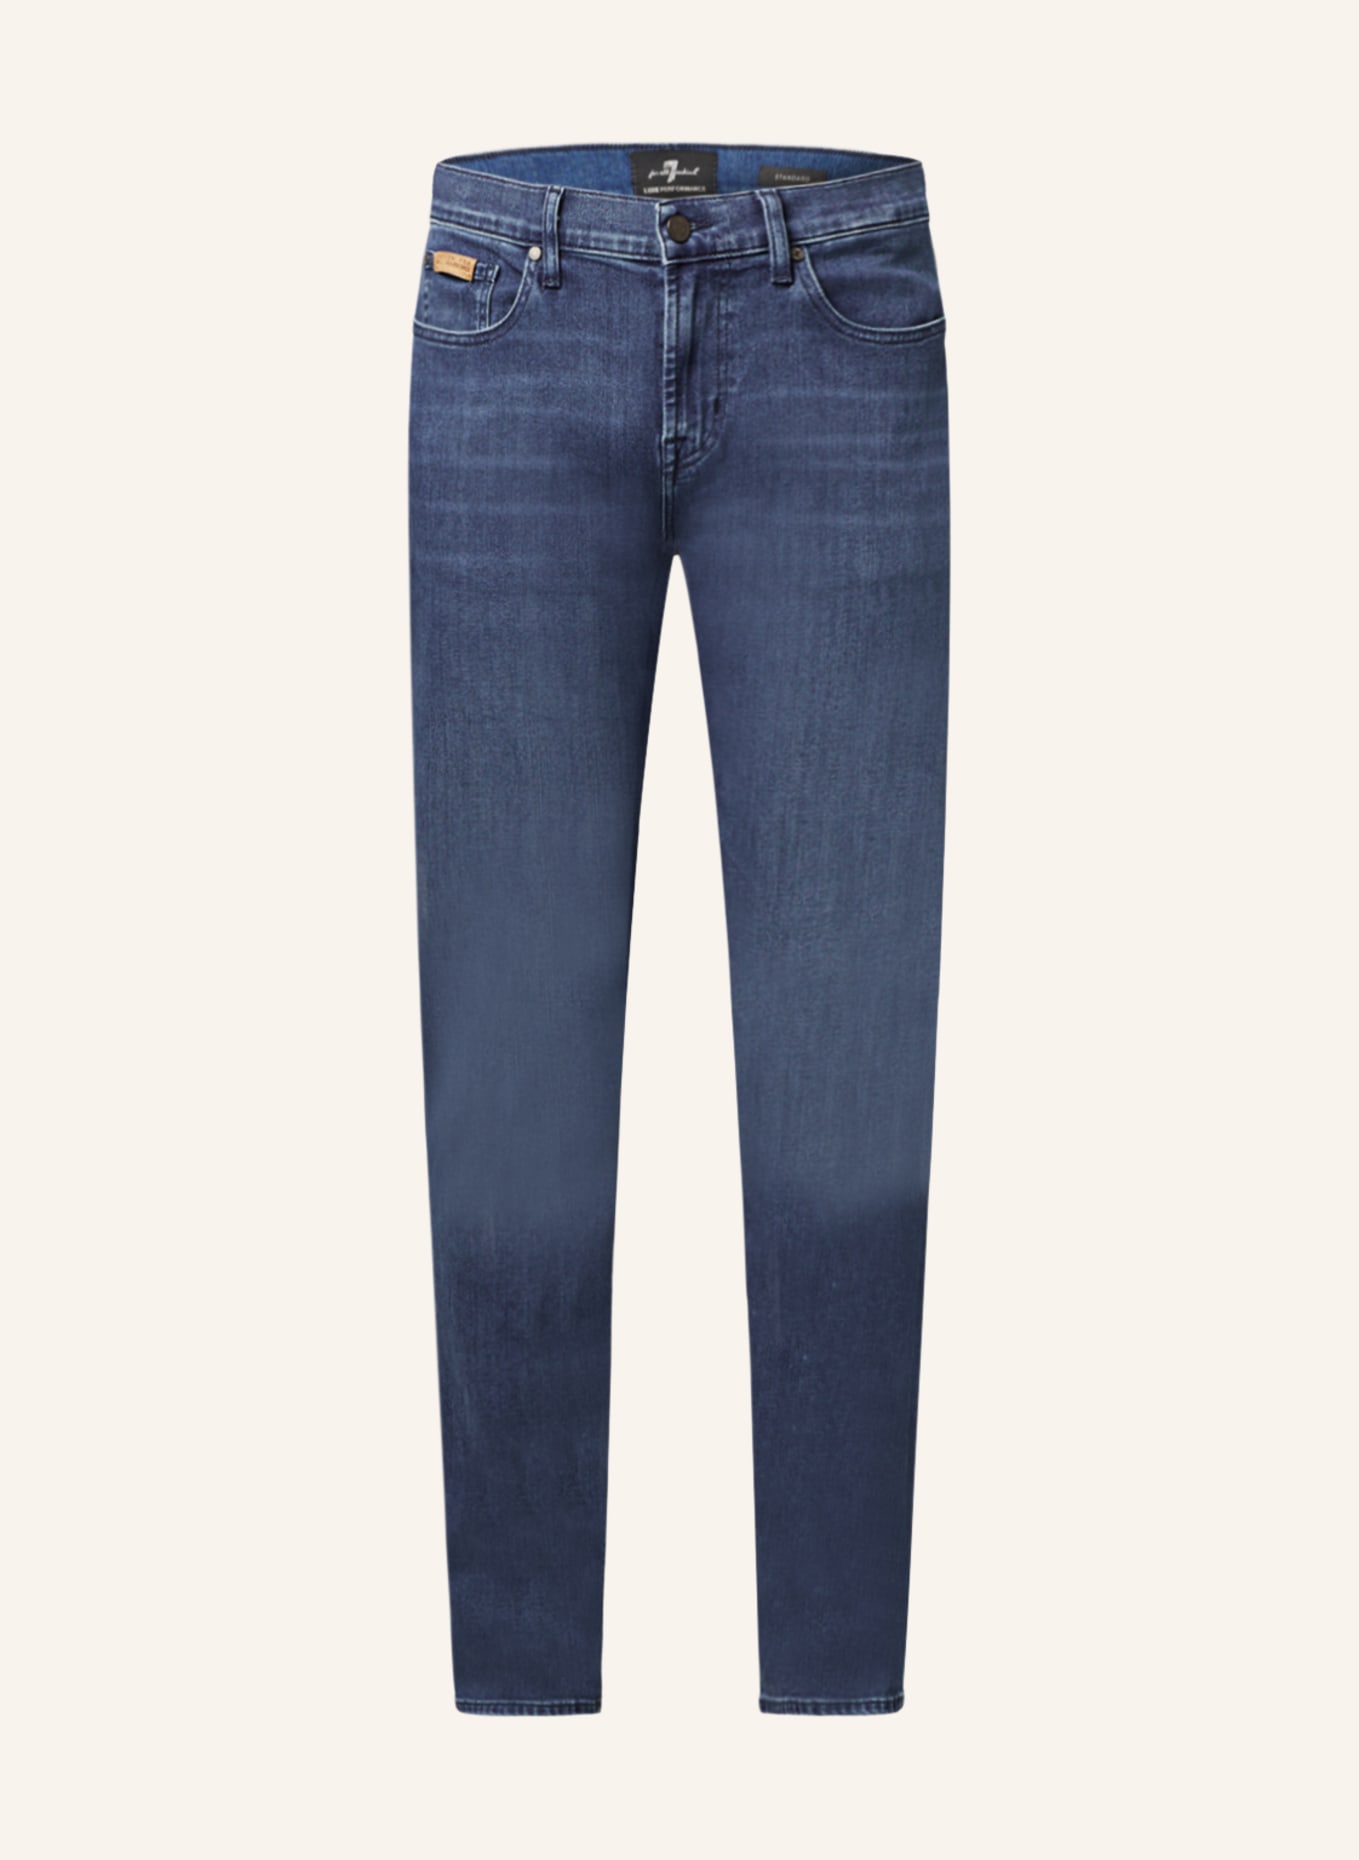 7 for all mankind Jeans STANDARD Straight Fit, Farbe: MID BLUE (Bild 1)